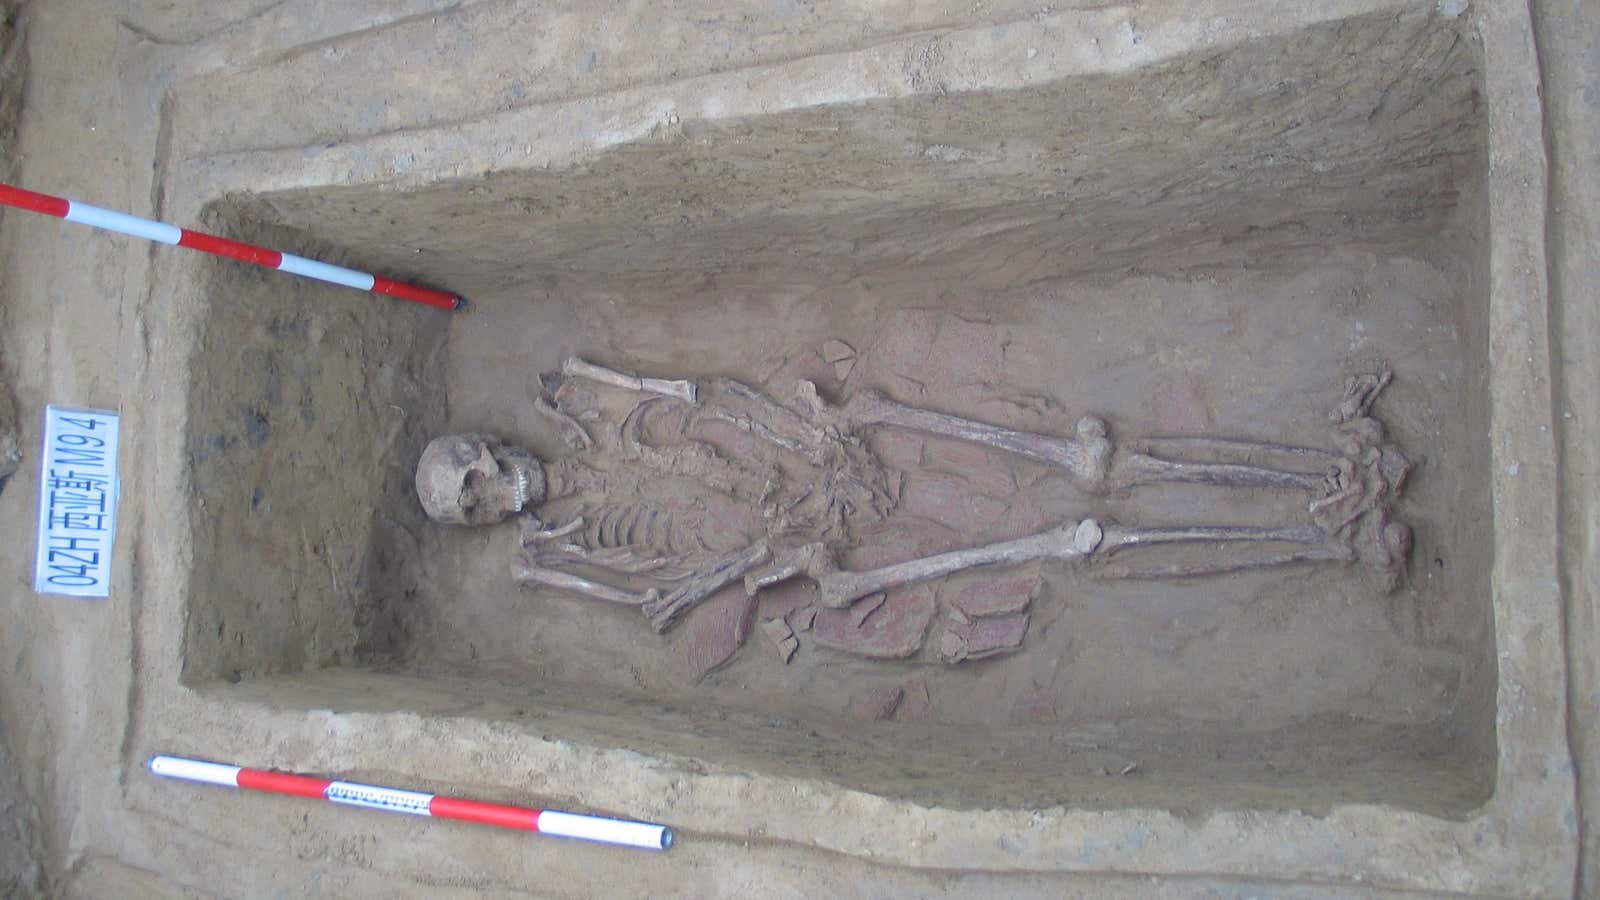 Eastern Zhou skeletons in the closet.